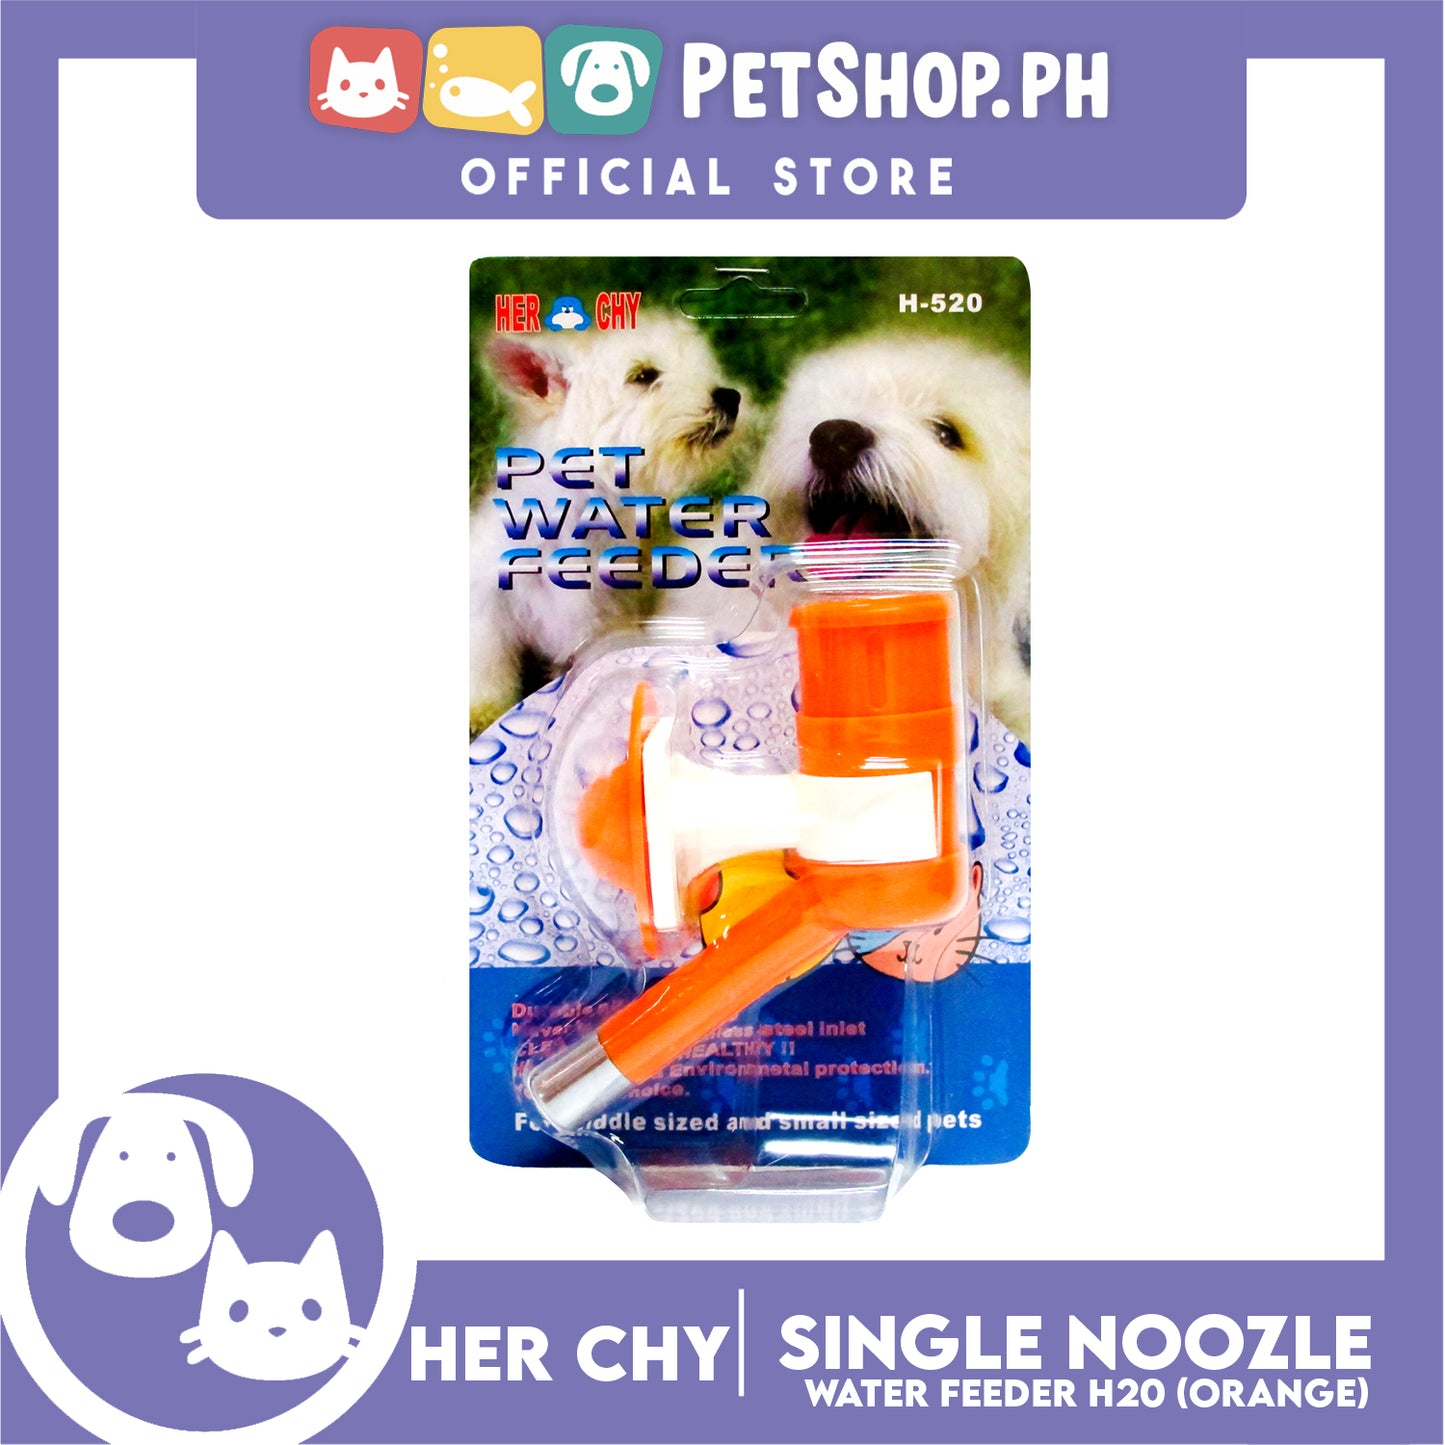 Her Chy Single Nozzle Pet Water Feeder Orange H520